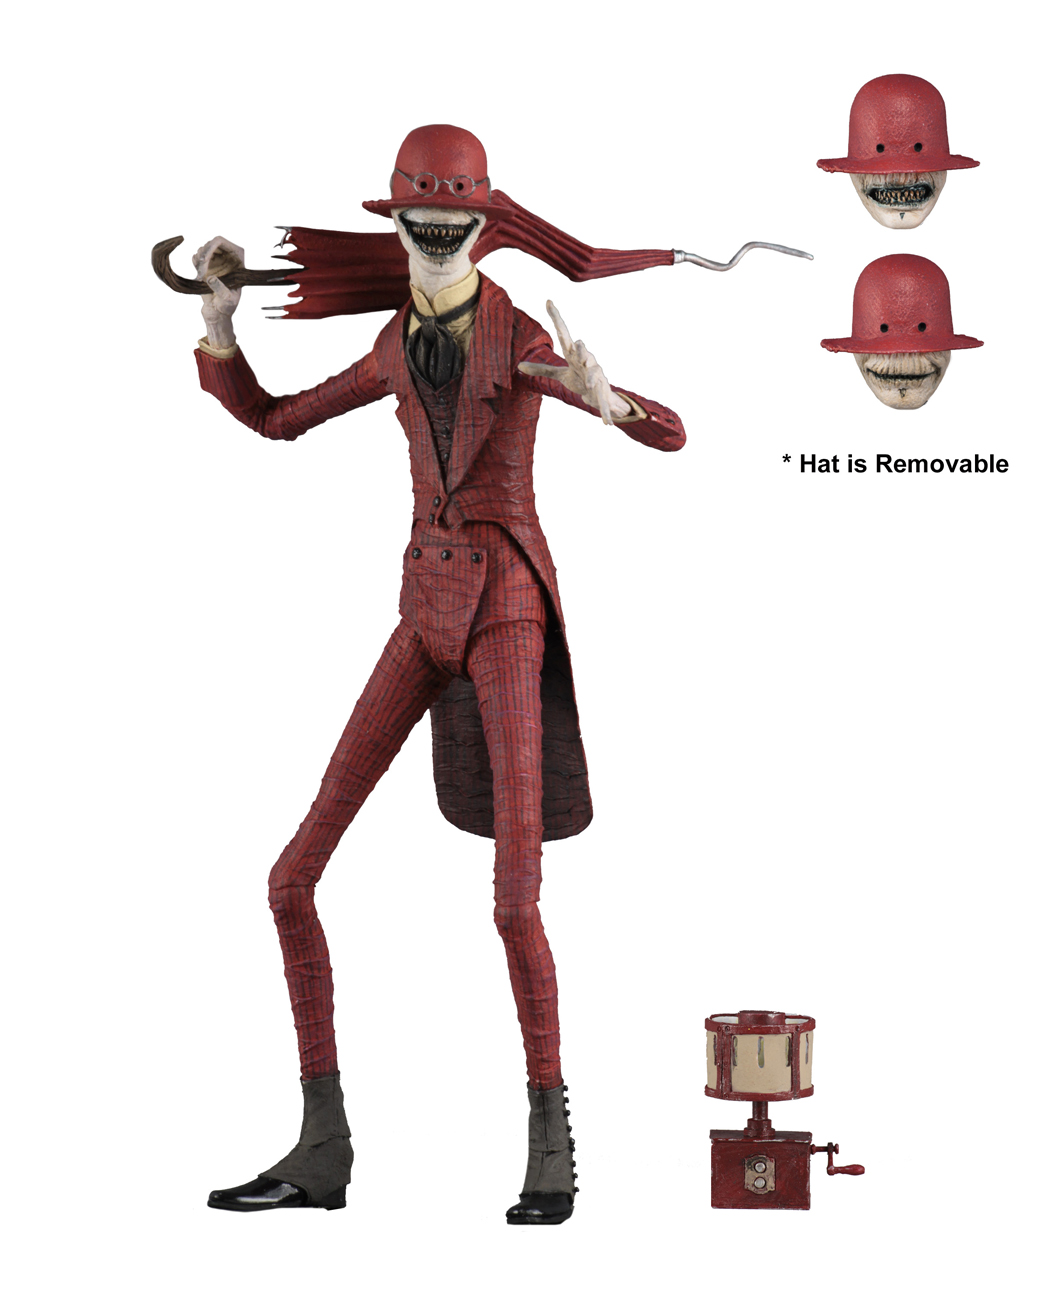 NECAOnline.com | Shipping This Week - Ultimate Crooked Man from The Conjuring Universe, 12